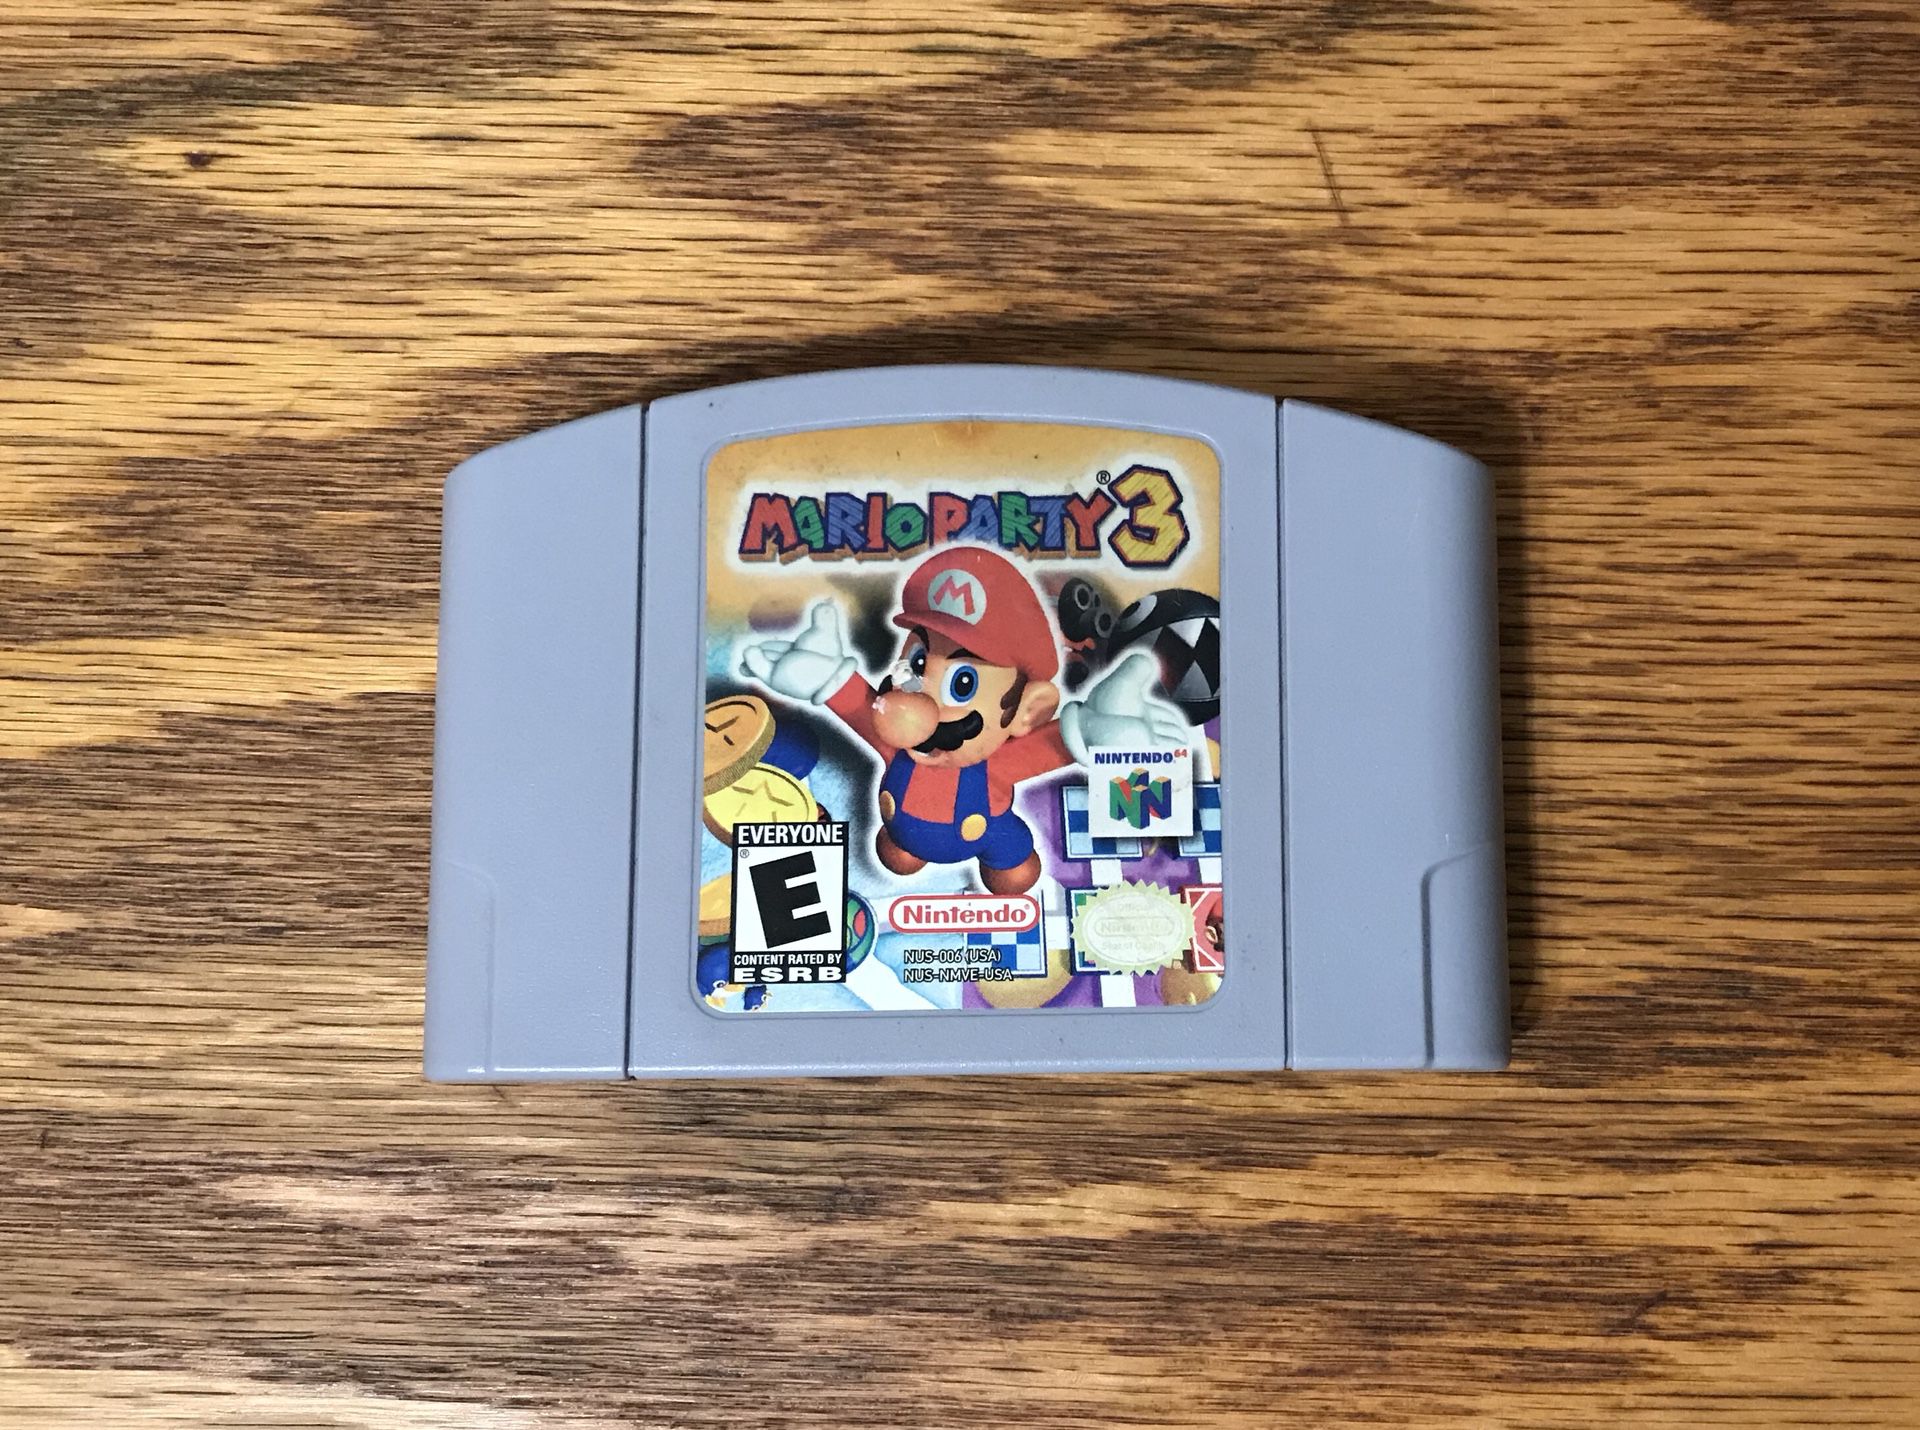 Mario Party 3 for Nintendo 64 video game console system n64 cartridge super bros brothers three